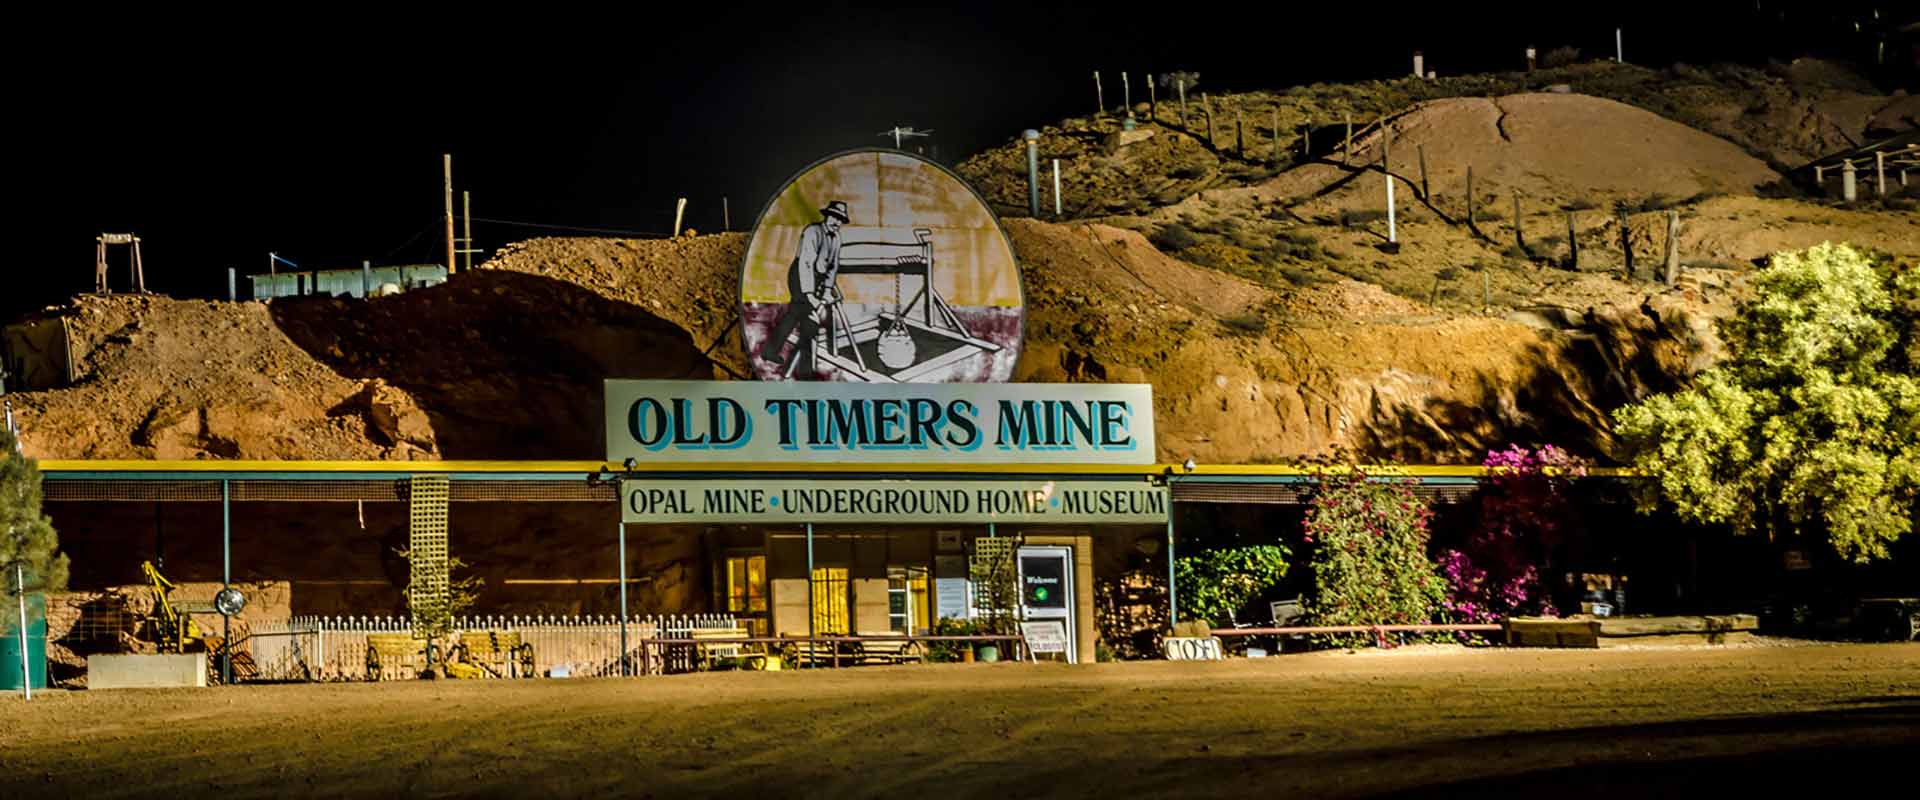 Old Timers Mine, Coober Pedy